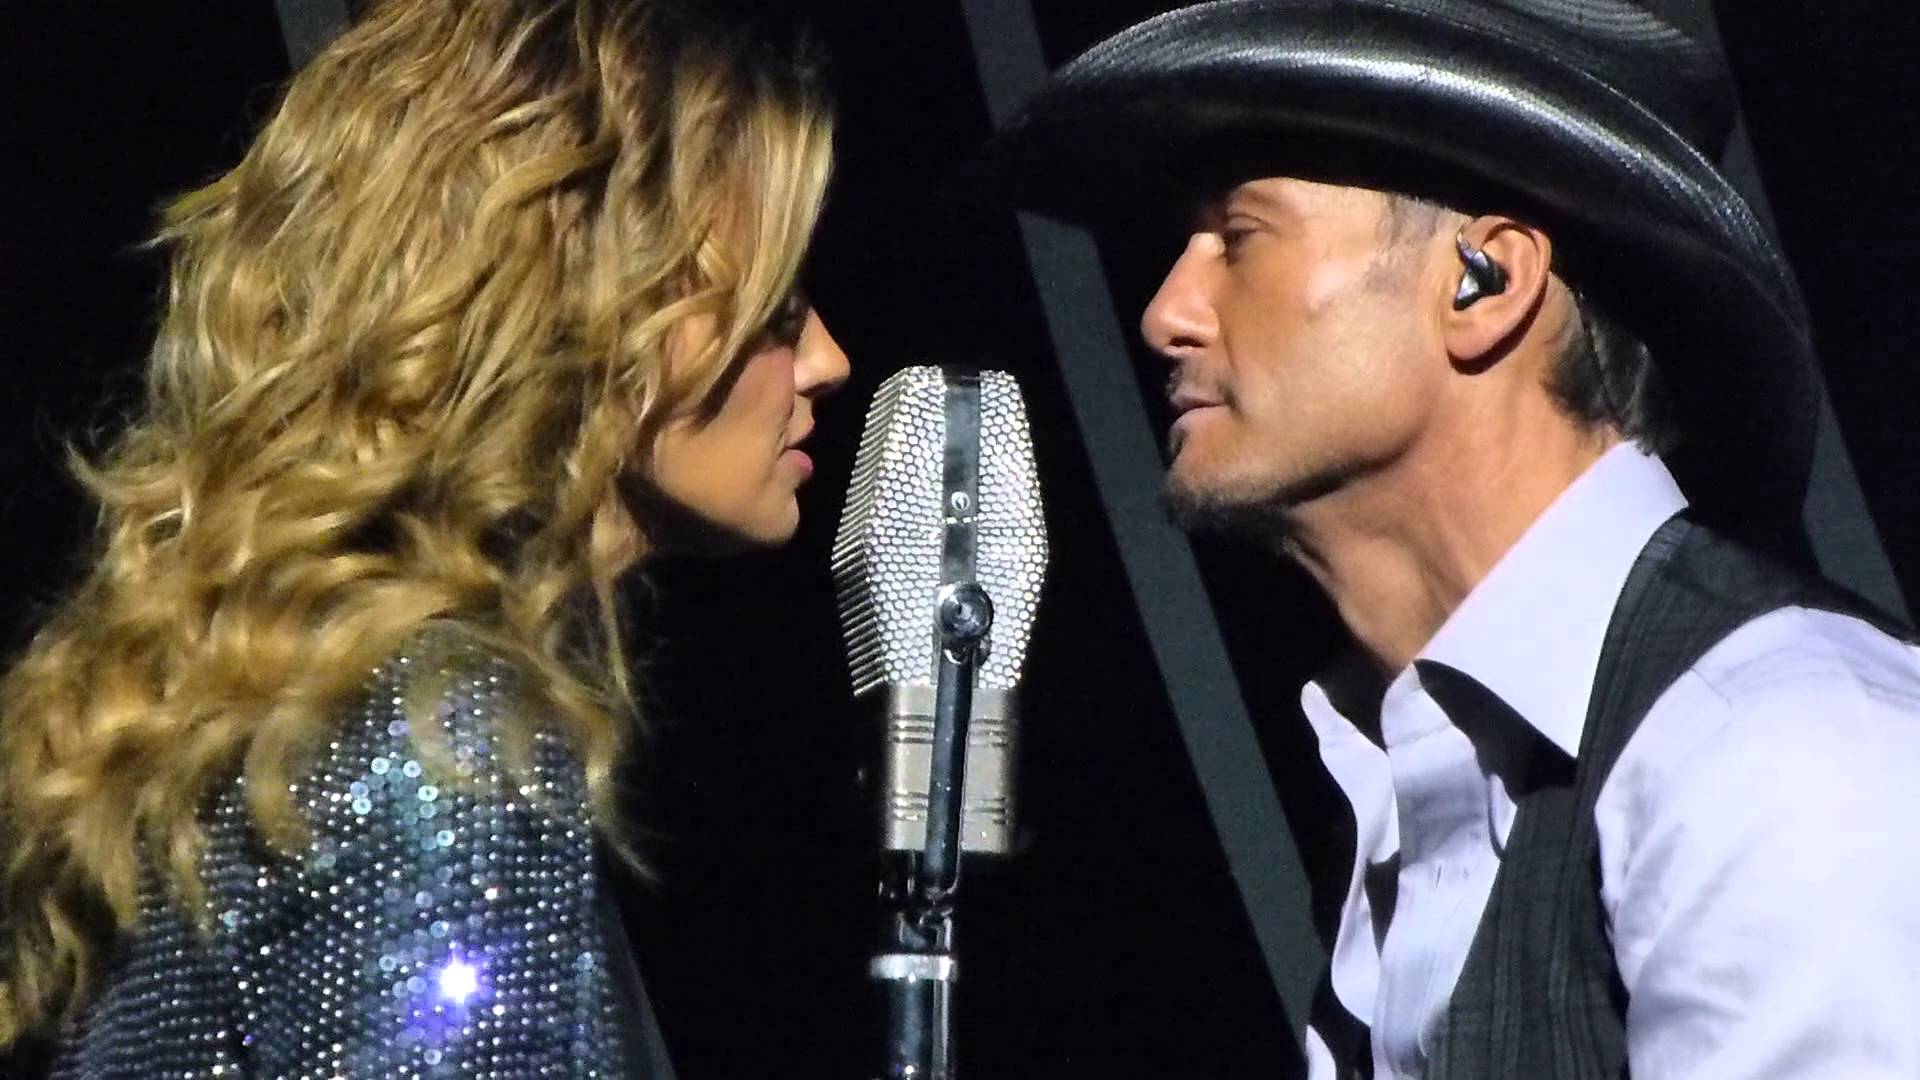 Tim McGraw and Faith Hill I Need You - YouTube